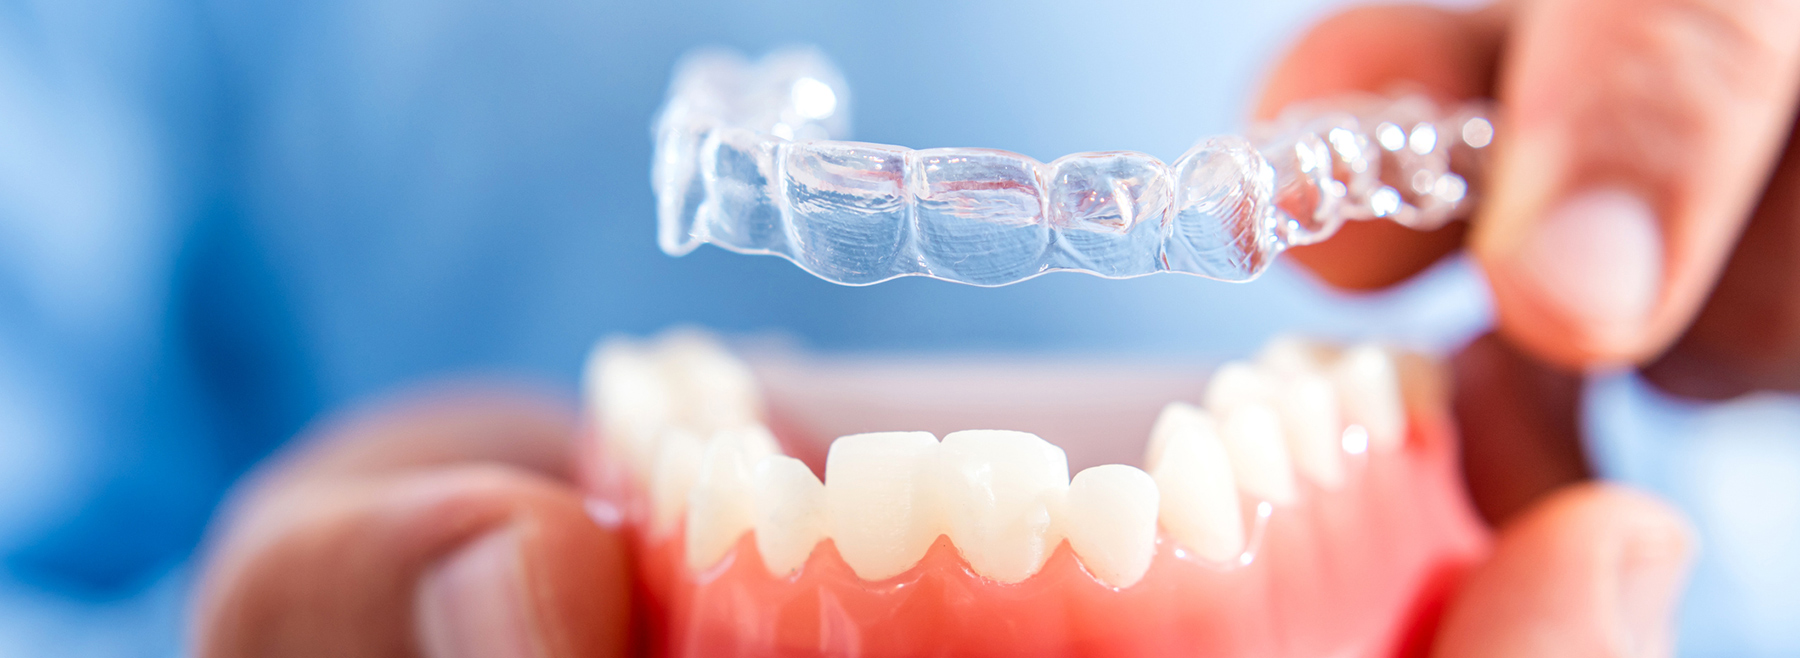 Invisalign aligners at our Waterdown dental clinic.